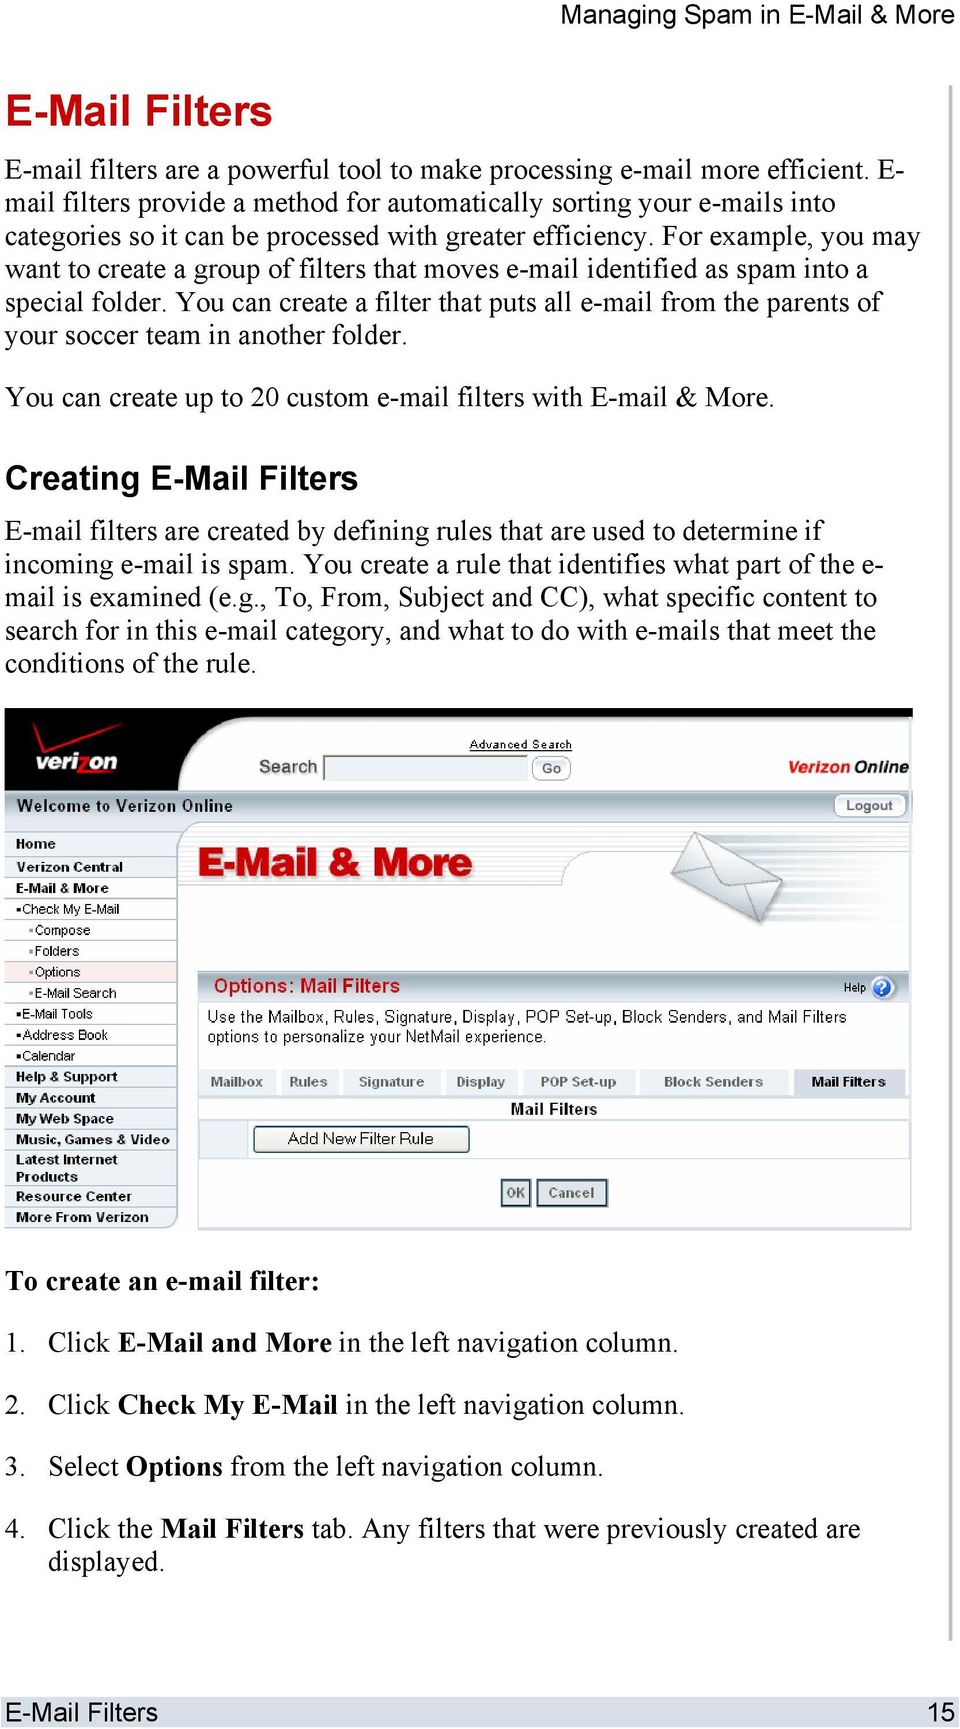 For example, you may want to create a group of filters that moves e-mail identified as spam into a special folder.